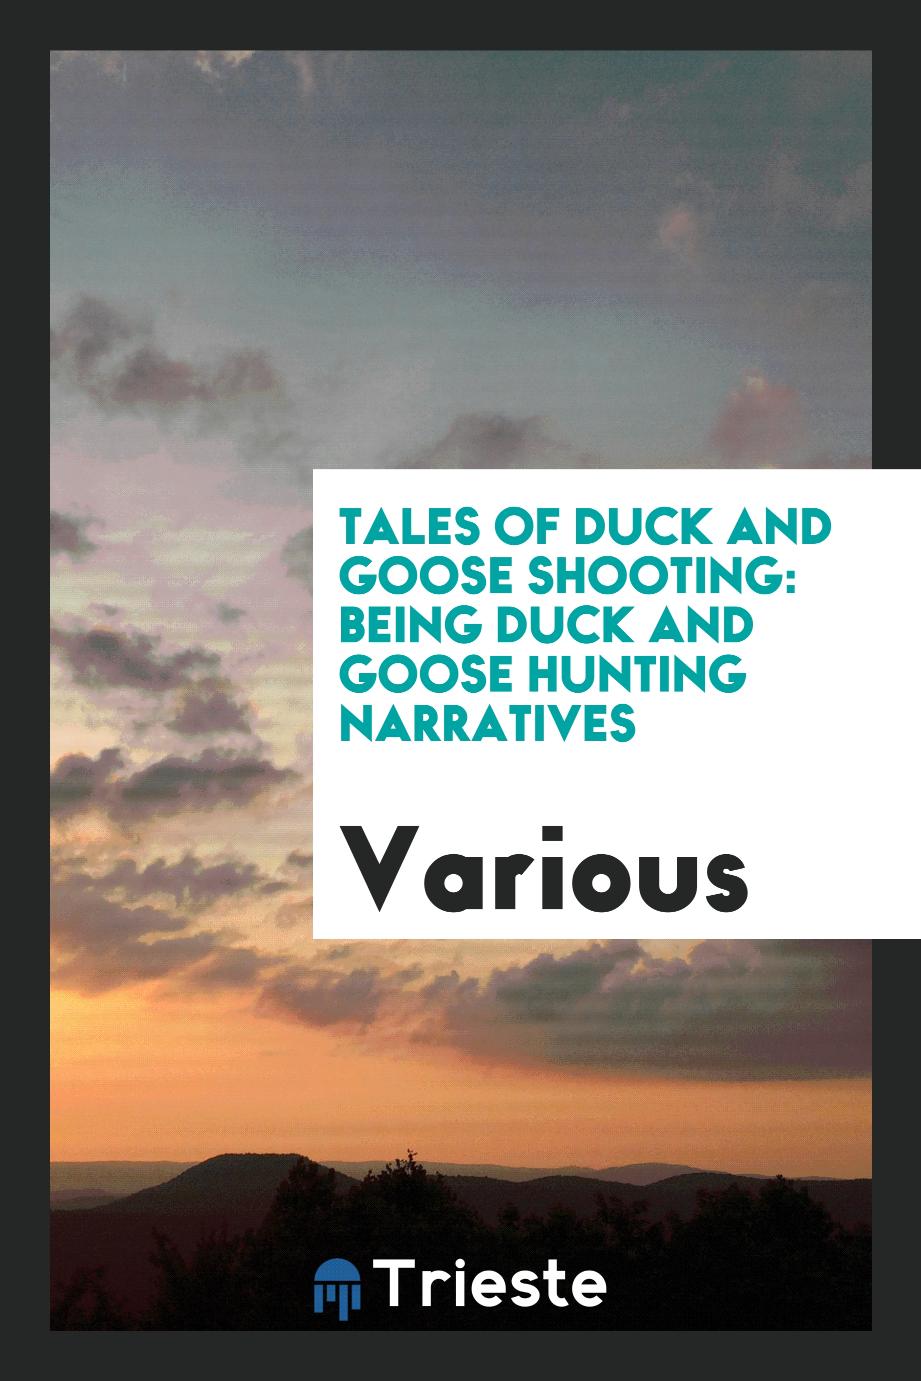 Tales of Duck and Goose Shooting: Being Duck and Goose Hunting Narratives